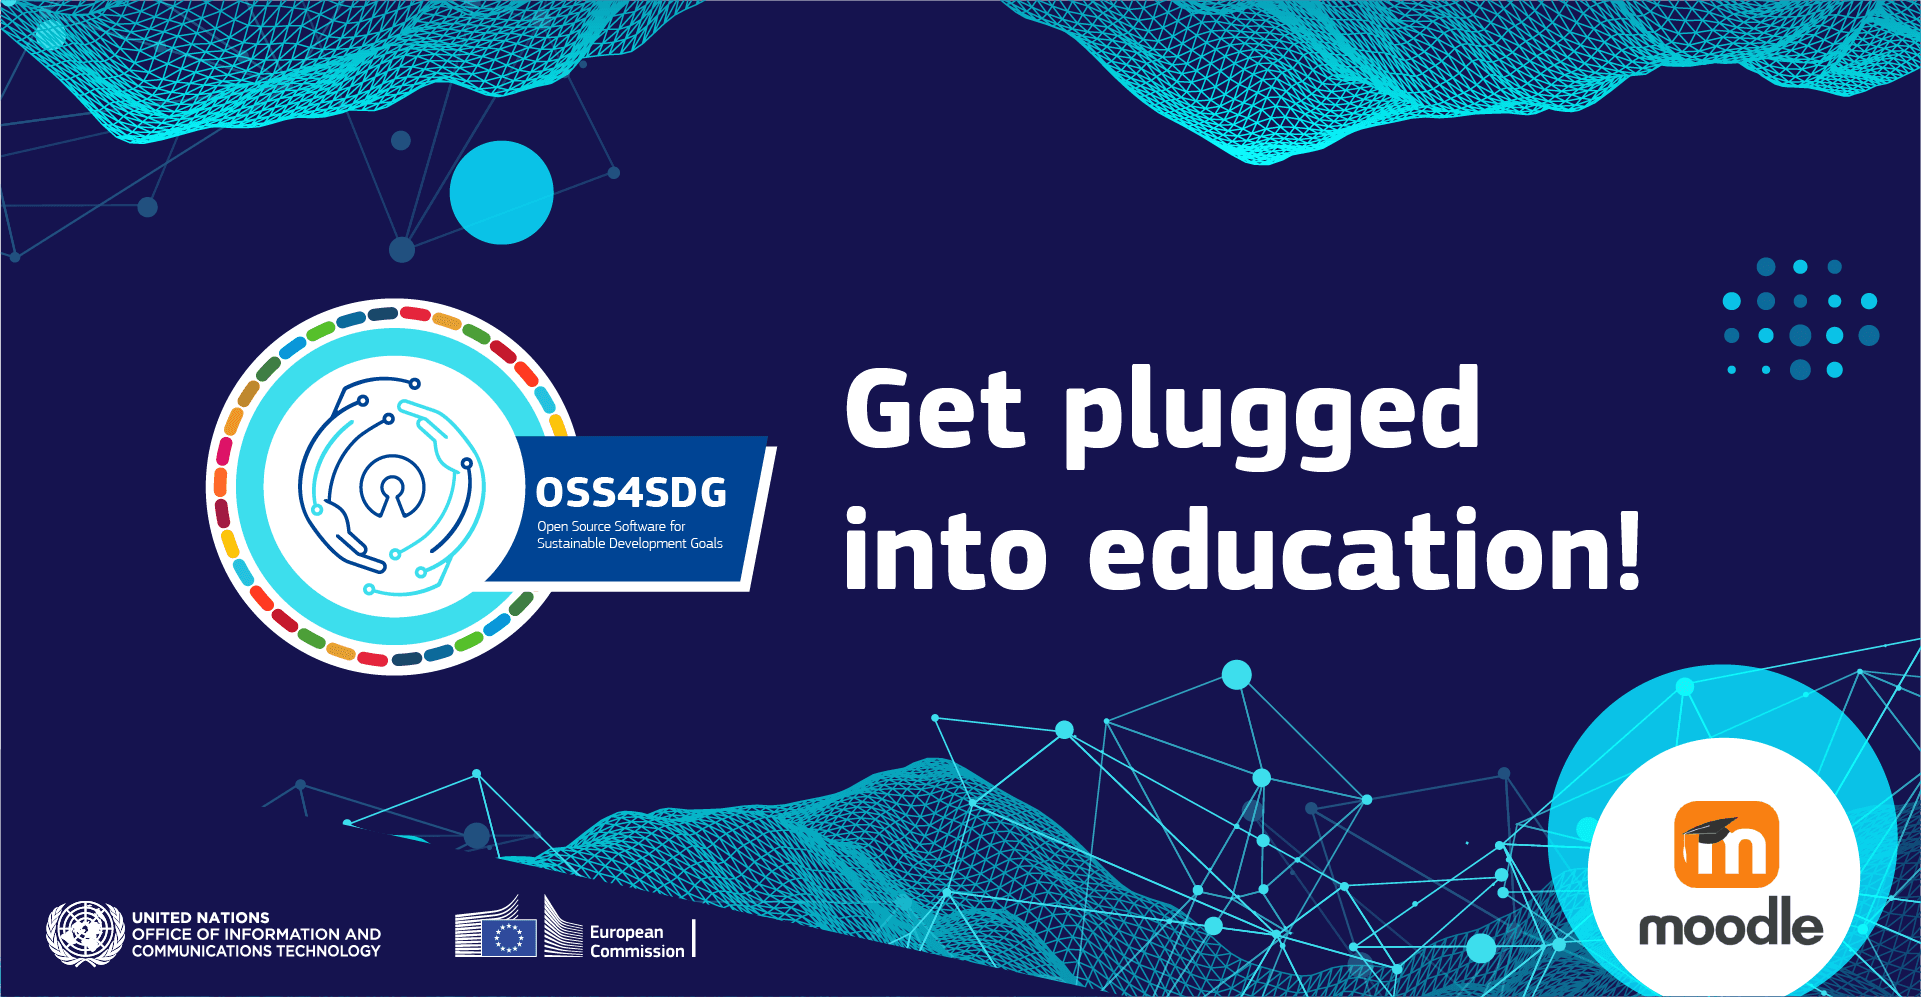 Join upcoming hackathon “Get plugged into education!” with Moodle